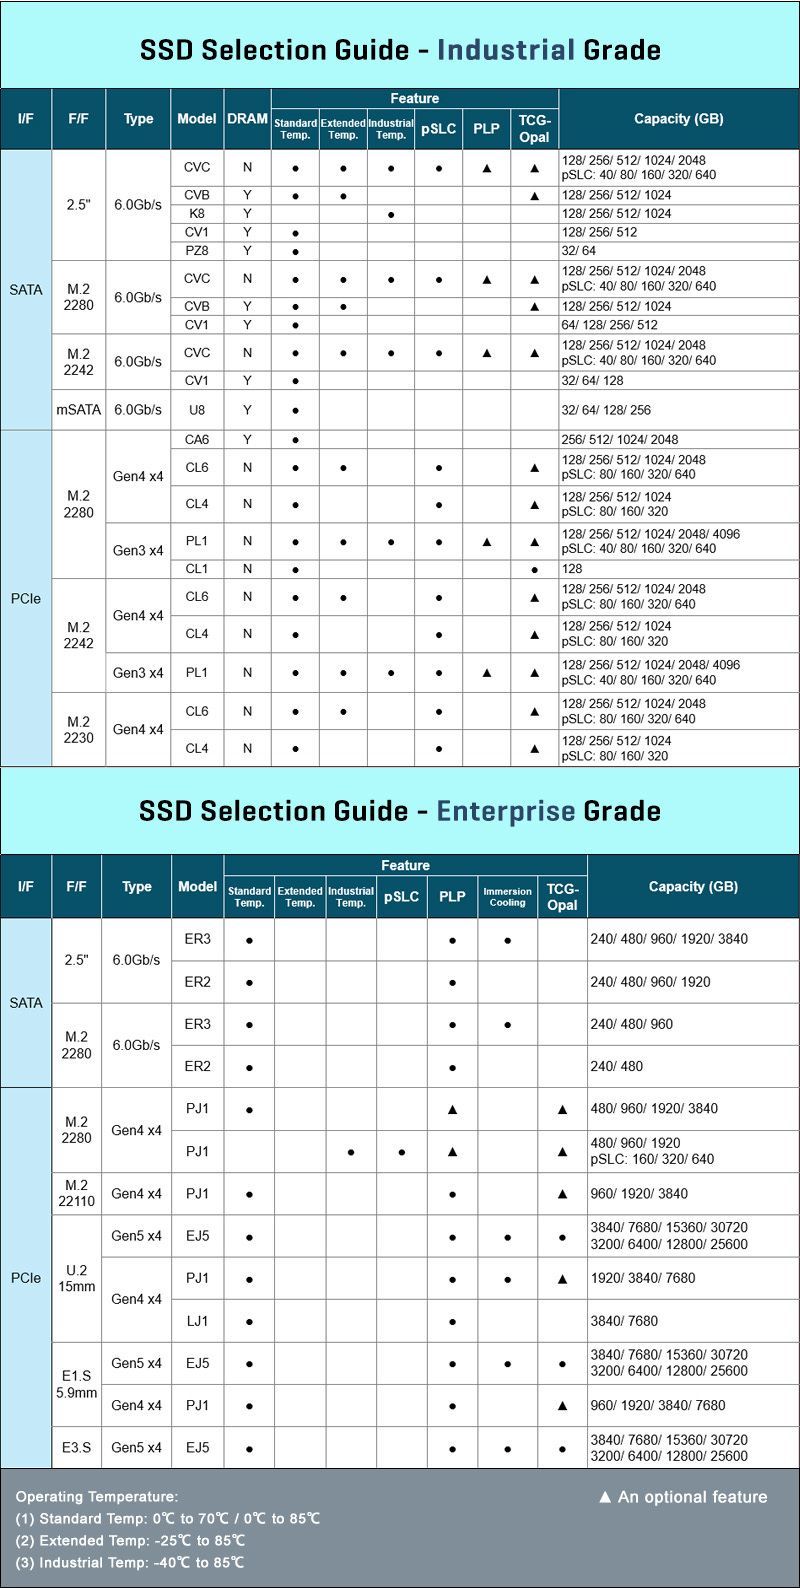 SSD Selection Guide